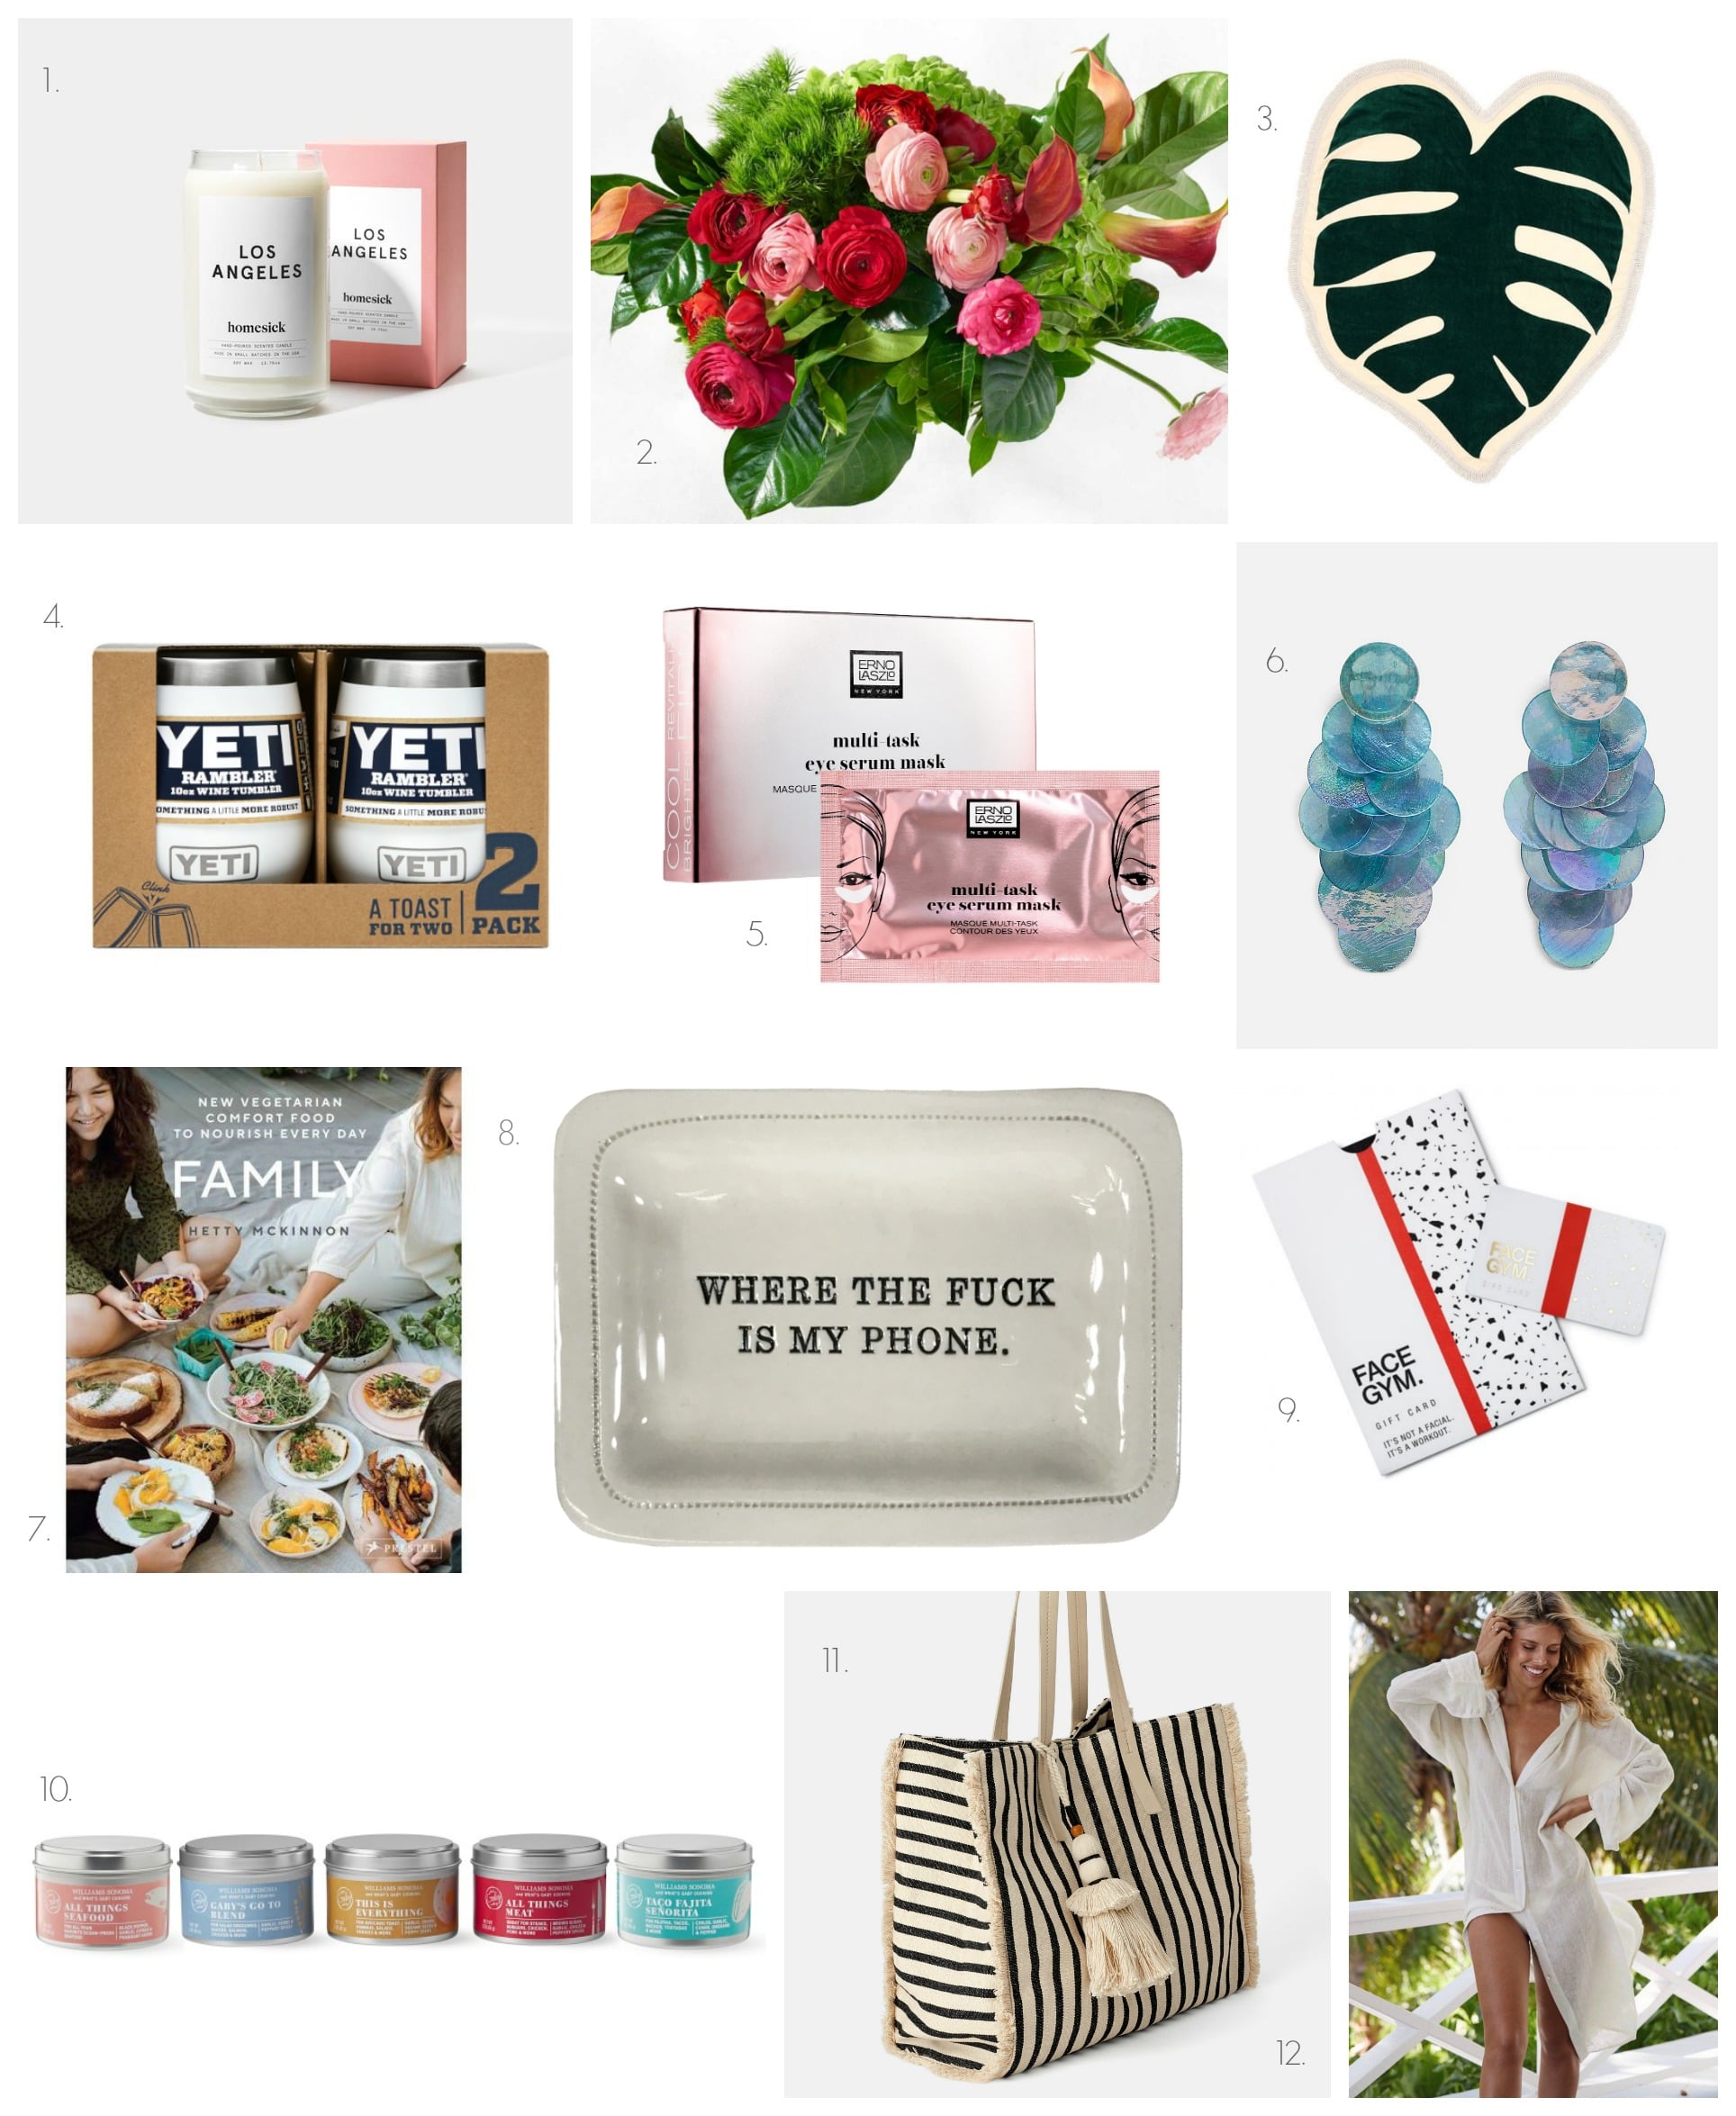 2019 Mother's Day Gift Guide